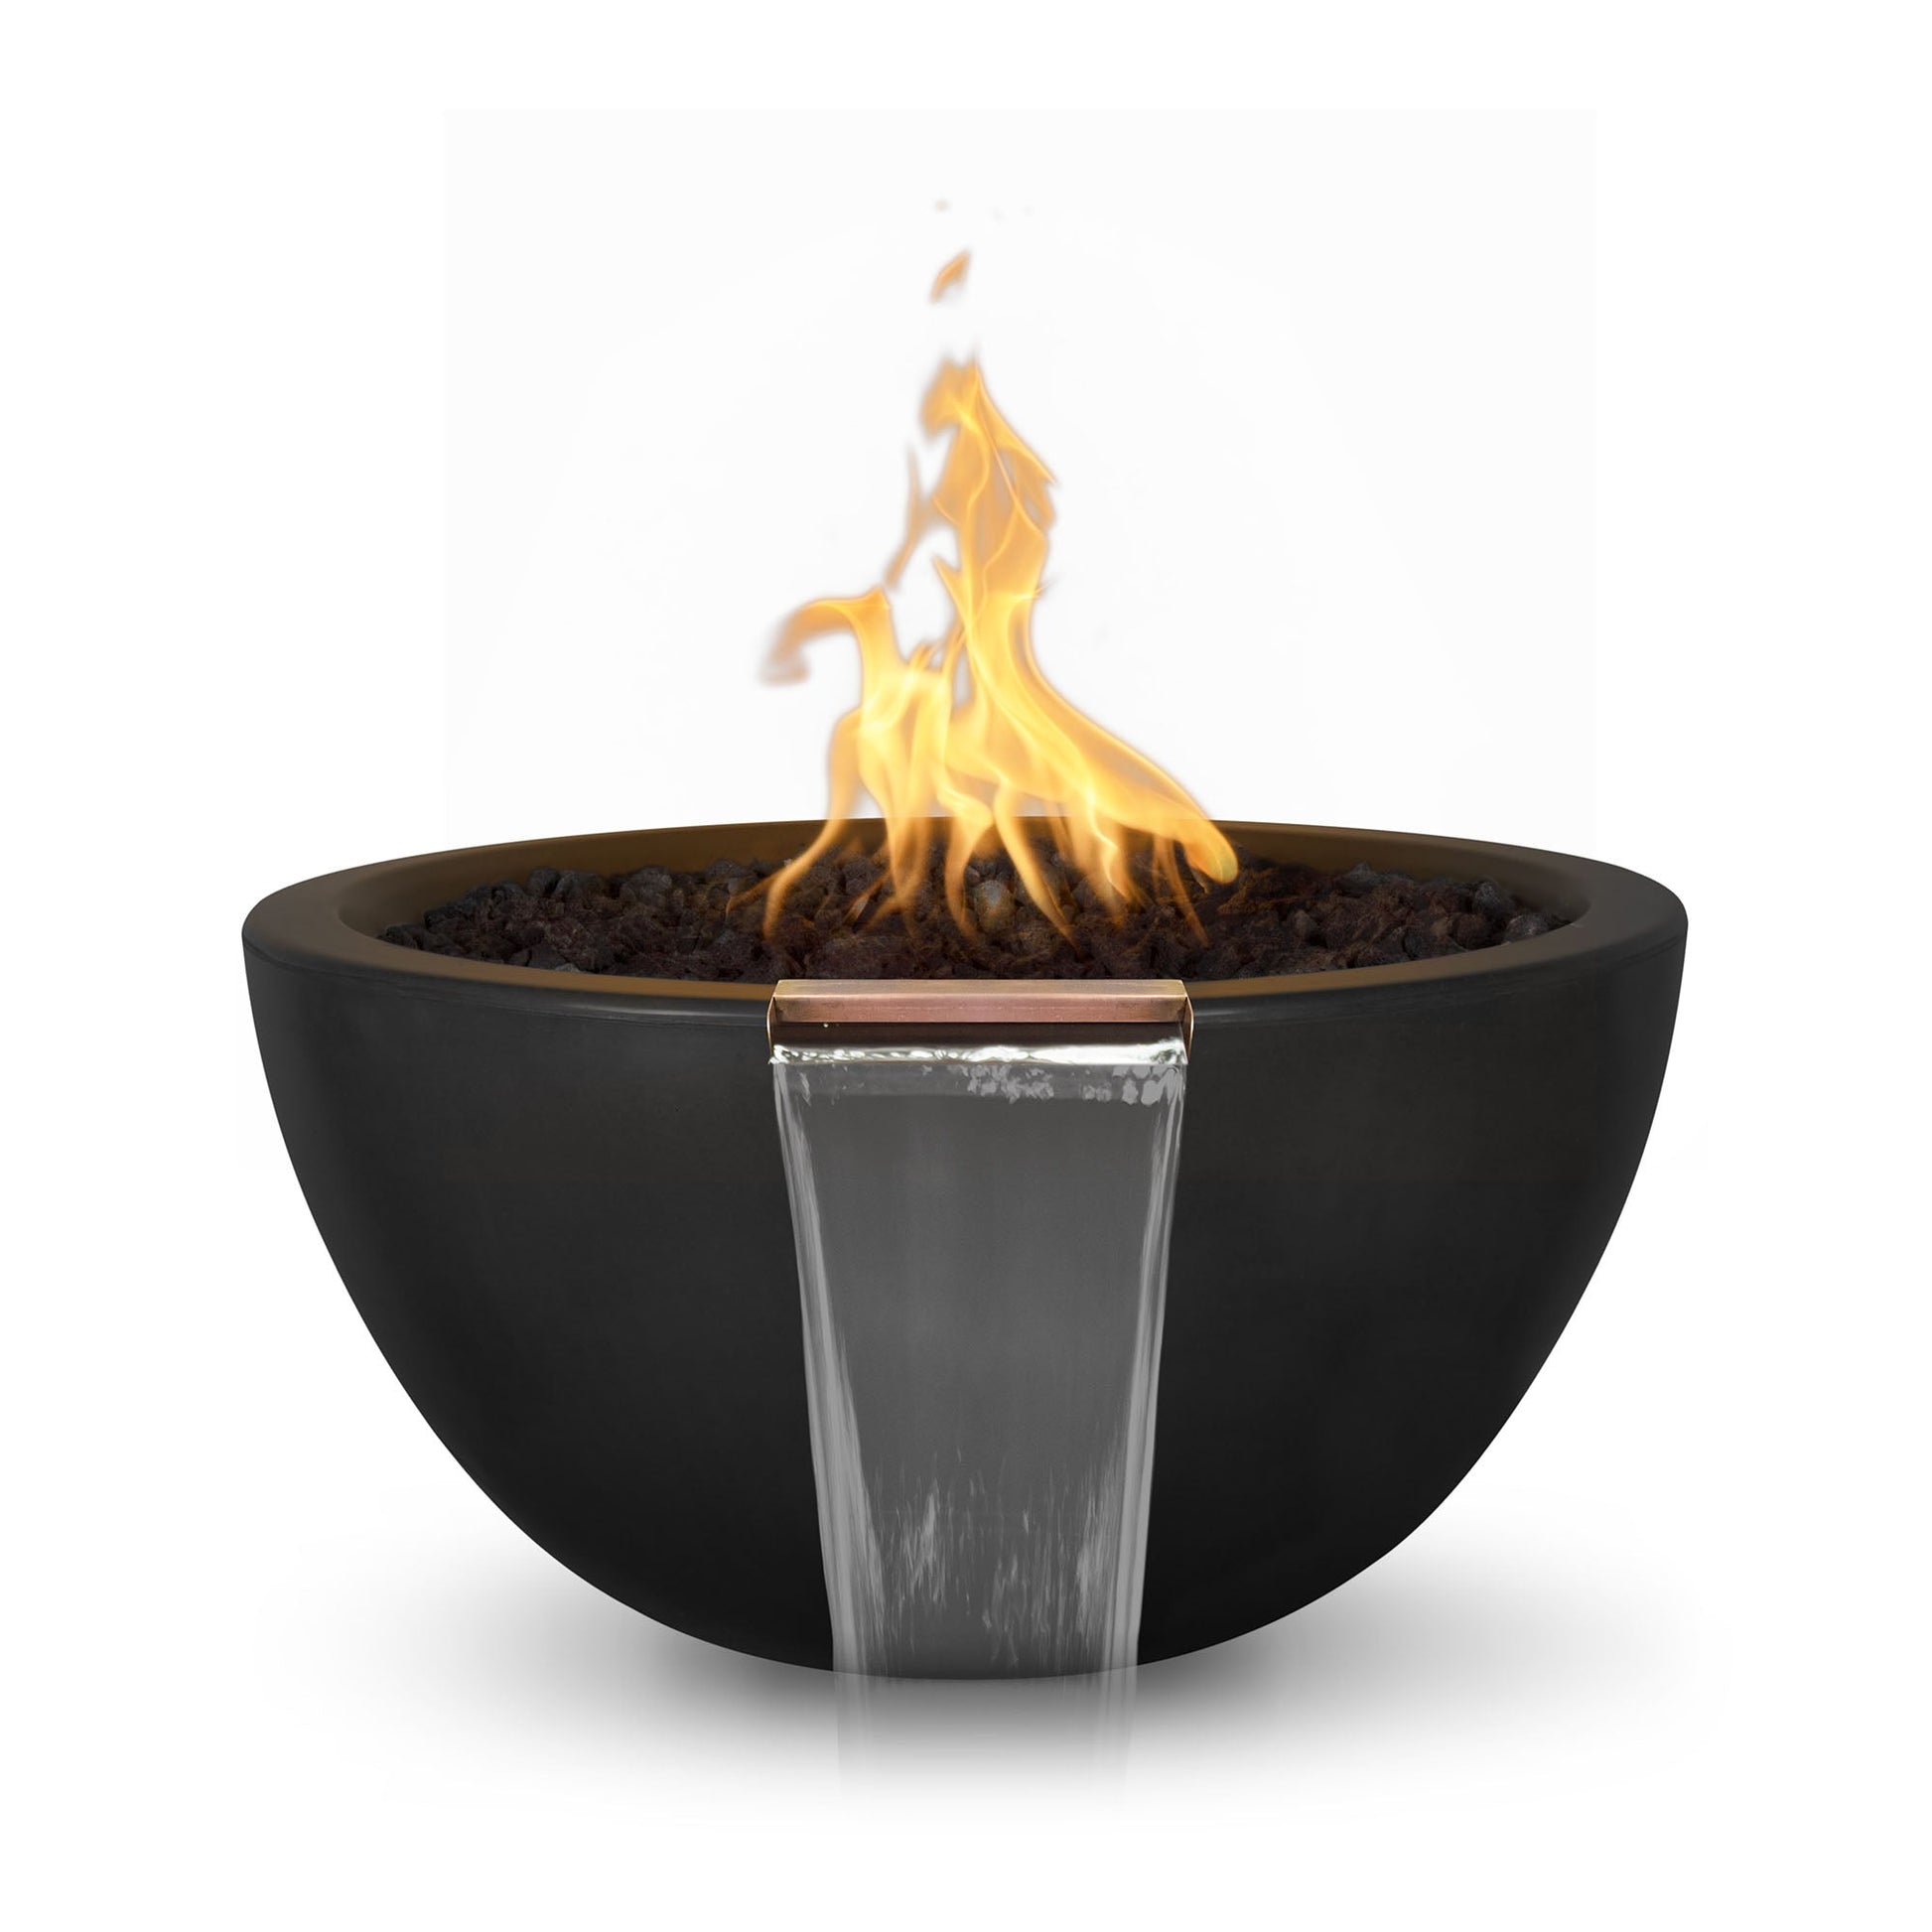 The Outdoor Plus Round Luna 30" Vanilla GFRC Concrete Natural Gas Fire & Water Bowl with Match Lit with Flame Sense Ignition